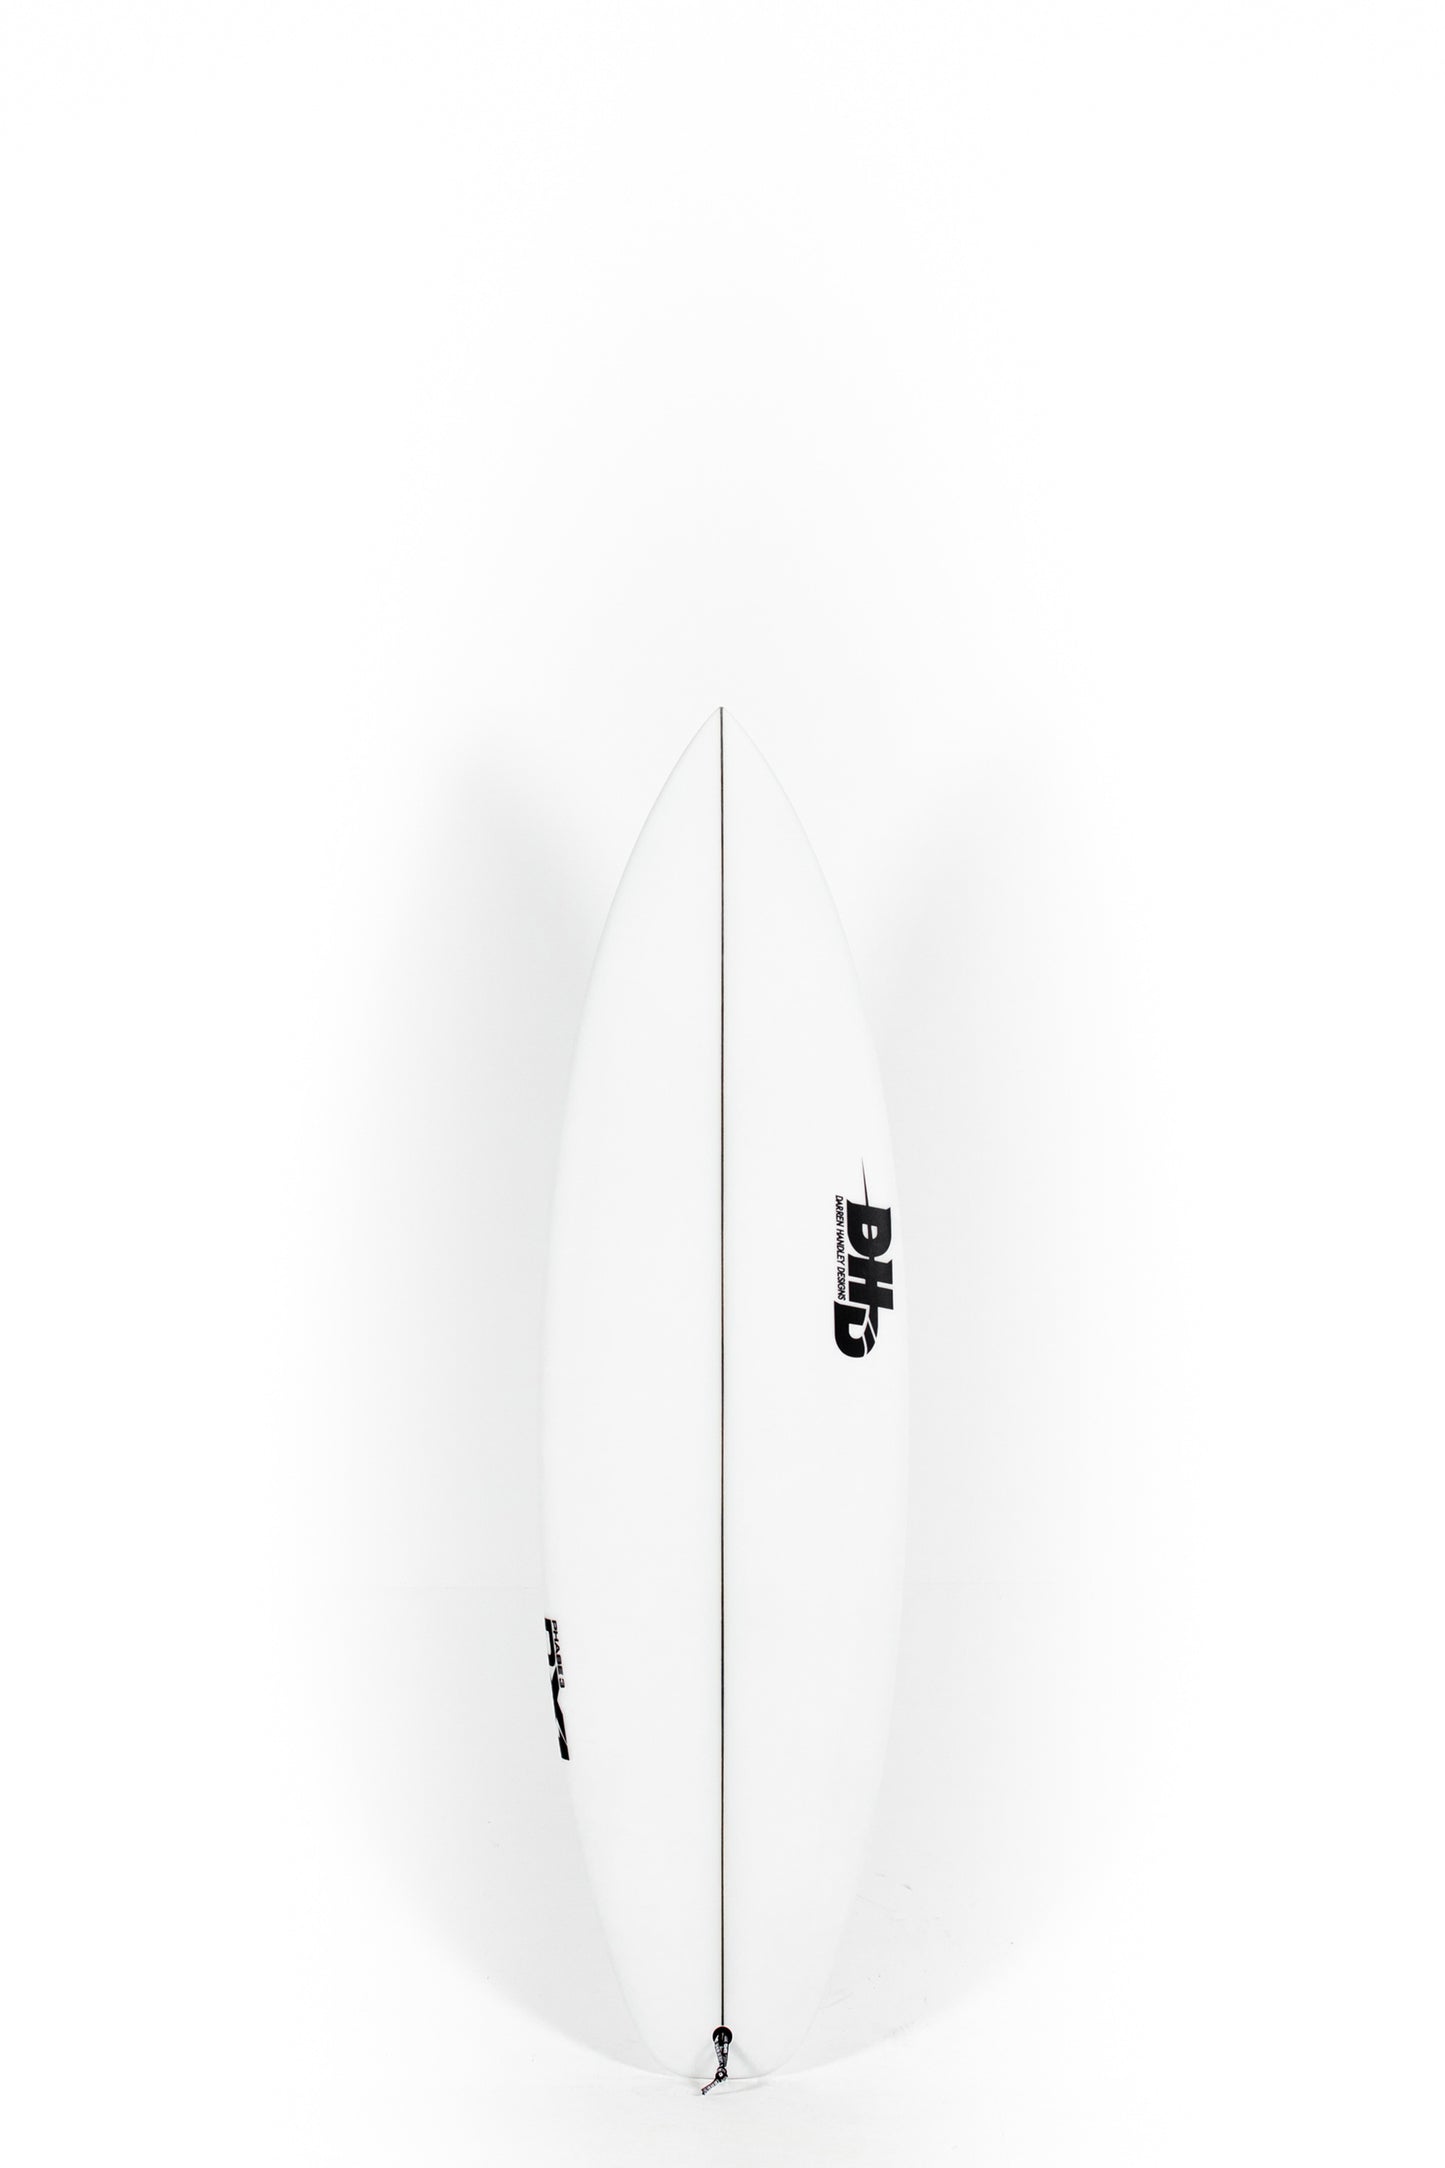 Pukas-Surf-Shop-DHD-Surfboards-DX1-Phase-3